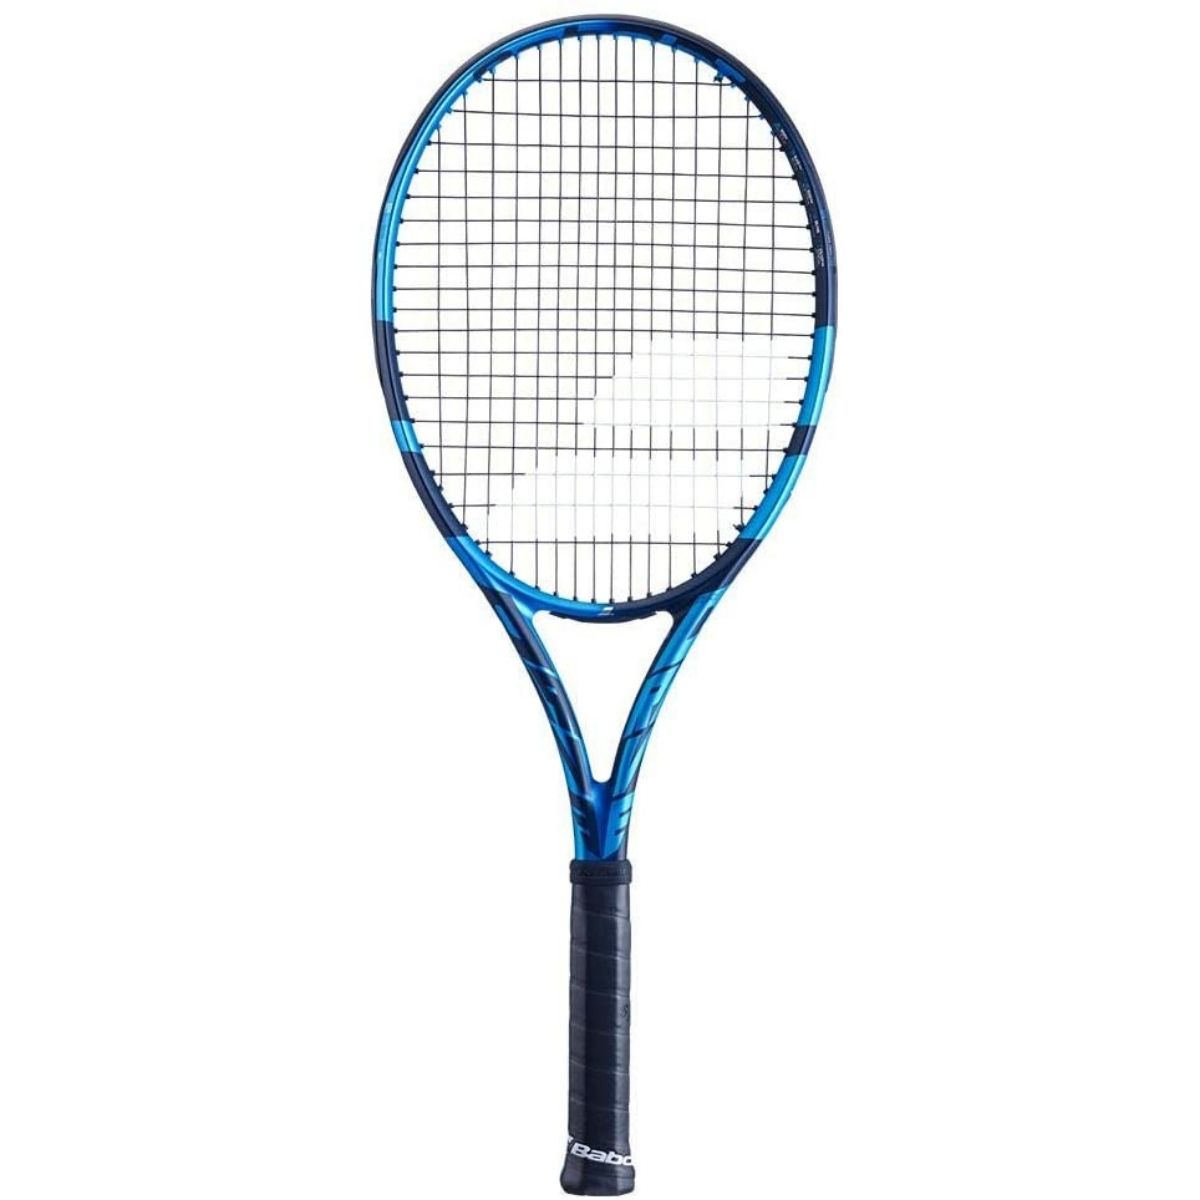 The Best Tennis Rackets for Intermediate Players Options: Babolat Pure Drive